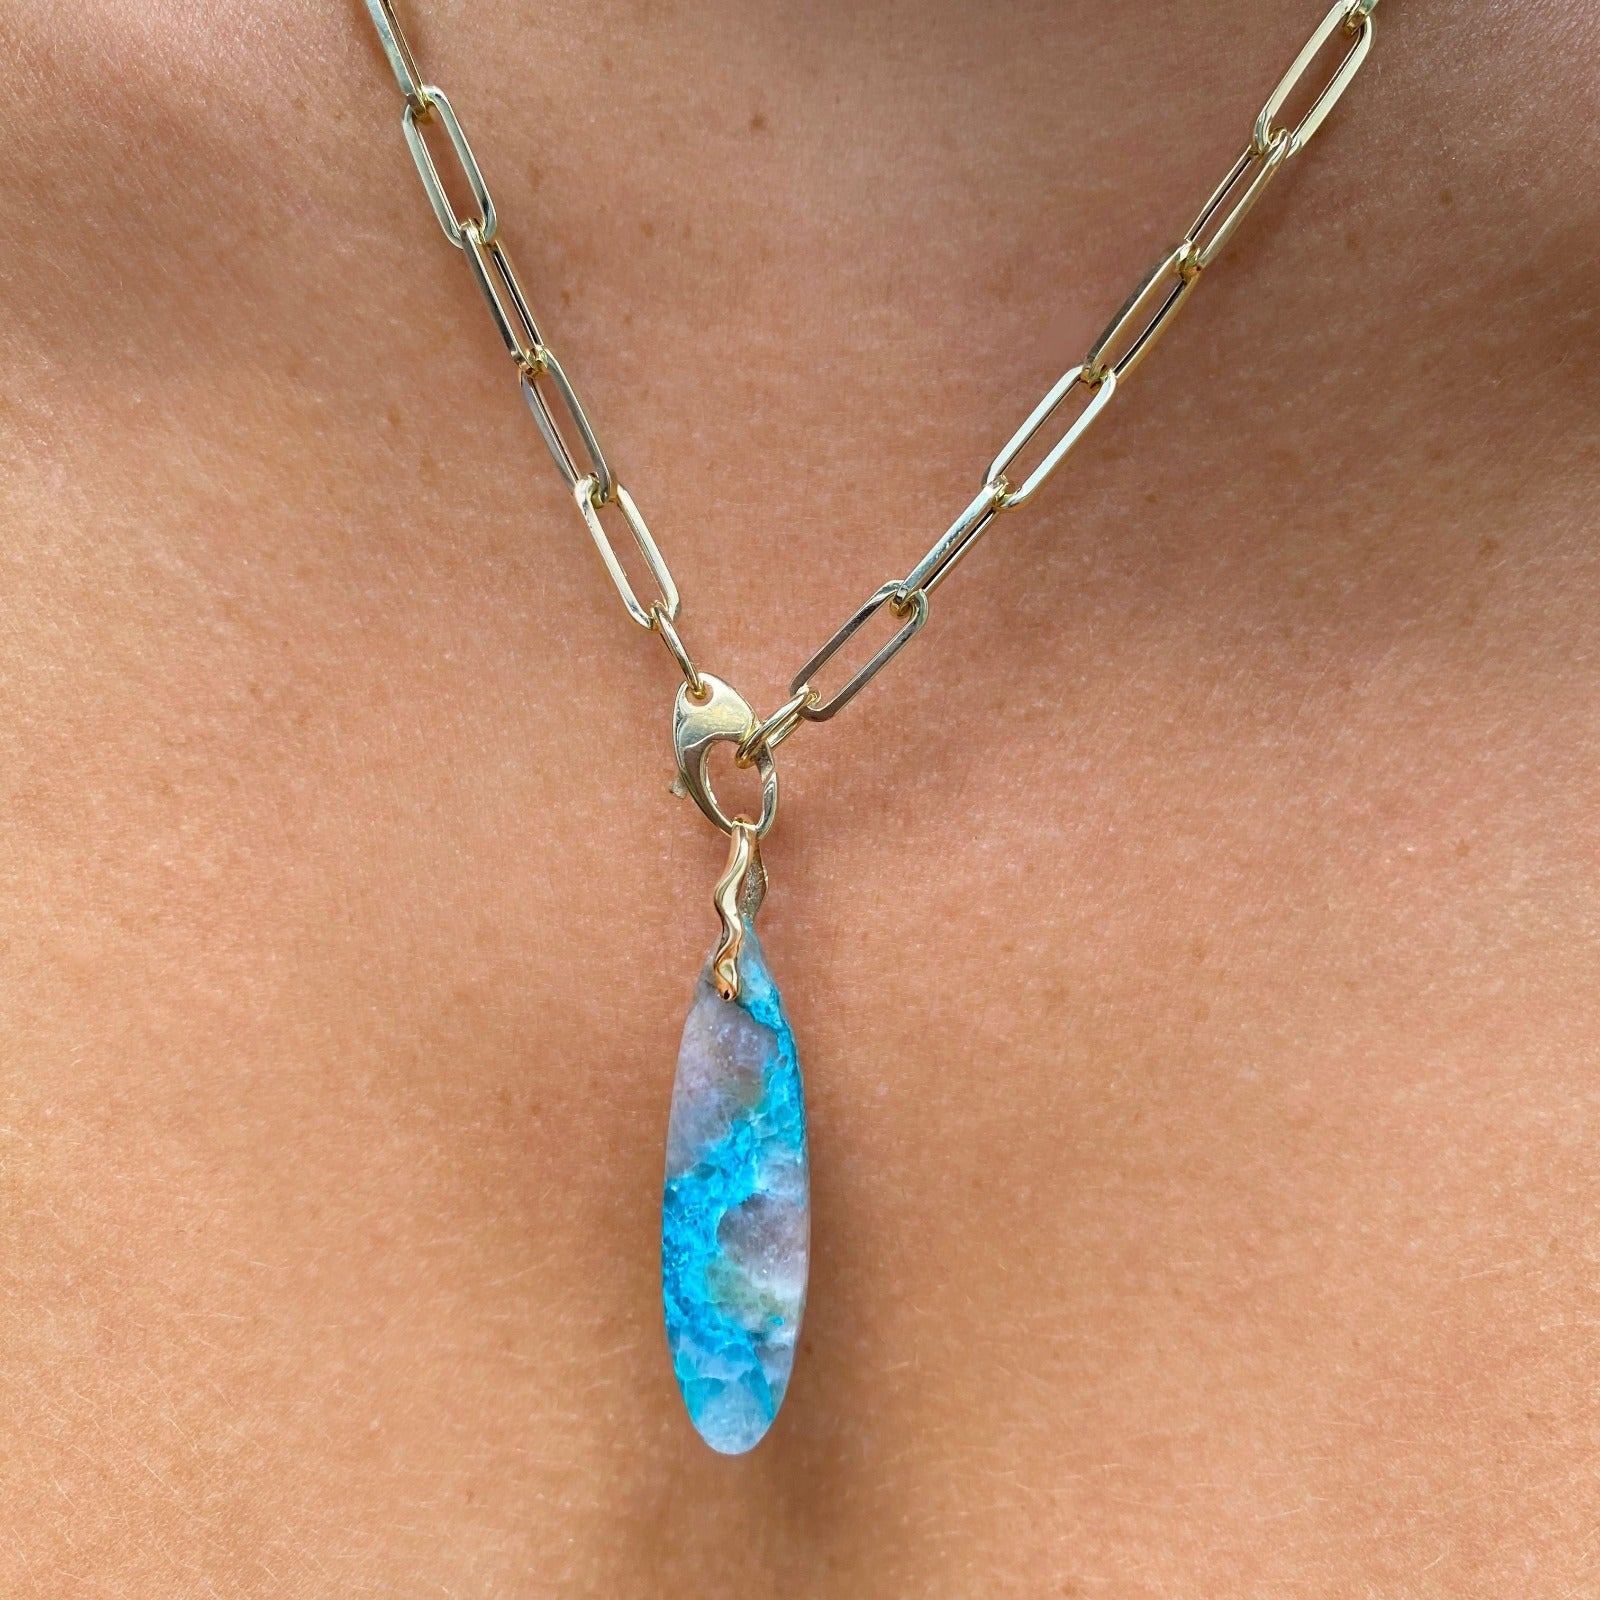 Chrysocolla in Quartz Surfboard Charm. Styled on a neck hanging from the lobster clasp of a paperclip chain necklace.